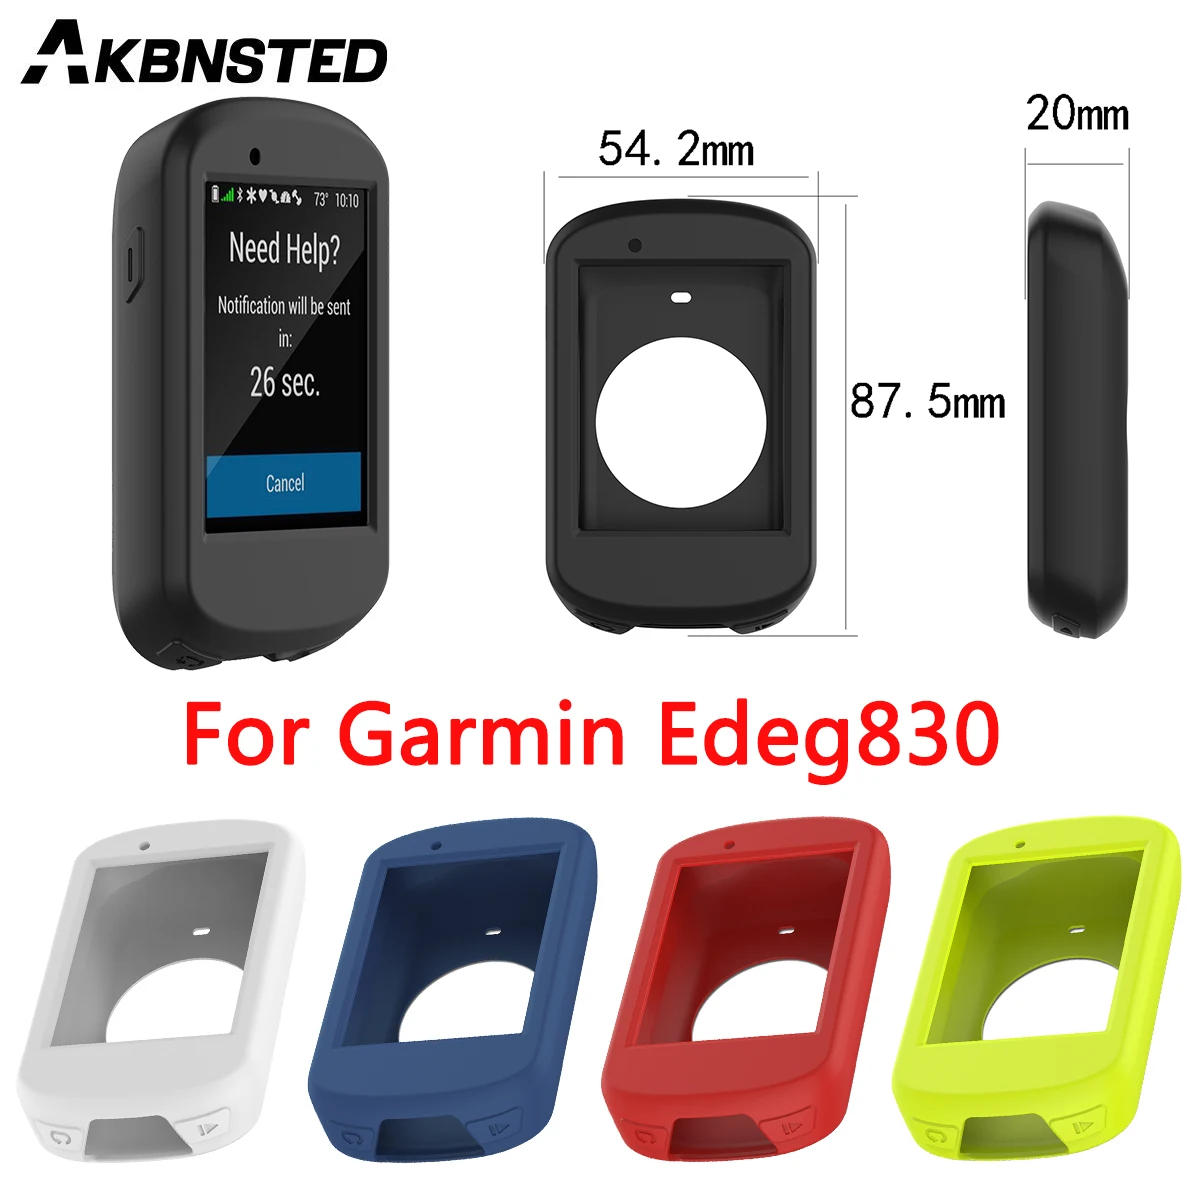 

AKBNSTED TPU Silicone Screen Protective Case For Garmin Edeg 830 Smart Watch Portable Replacement Watch Case Cover Accessories